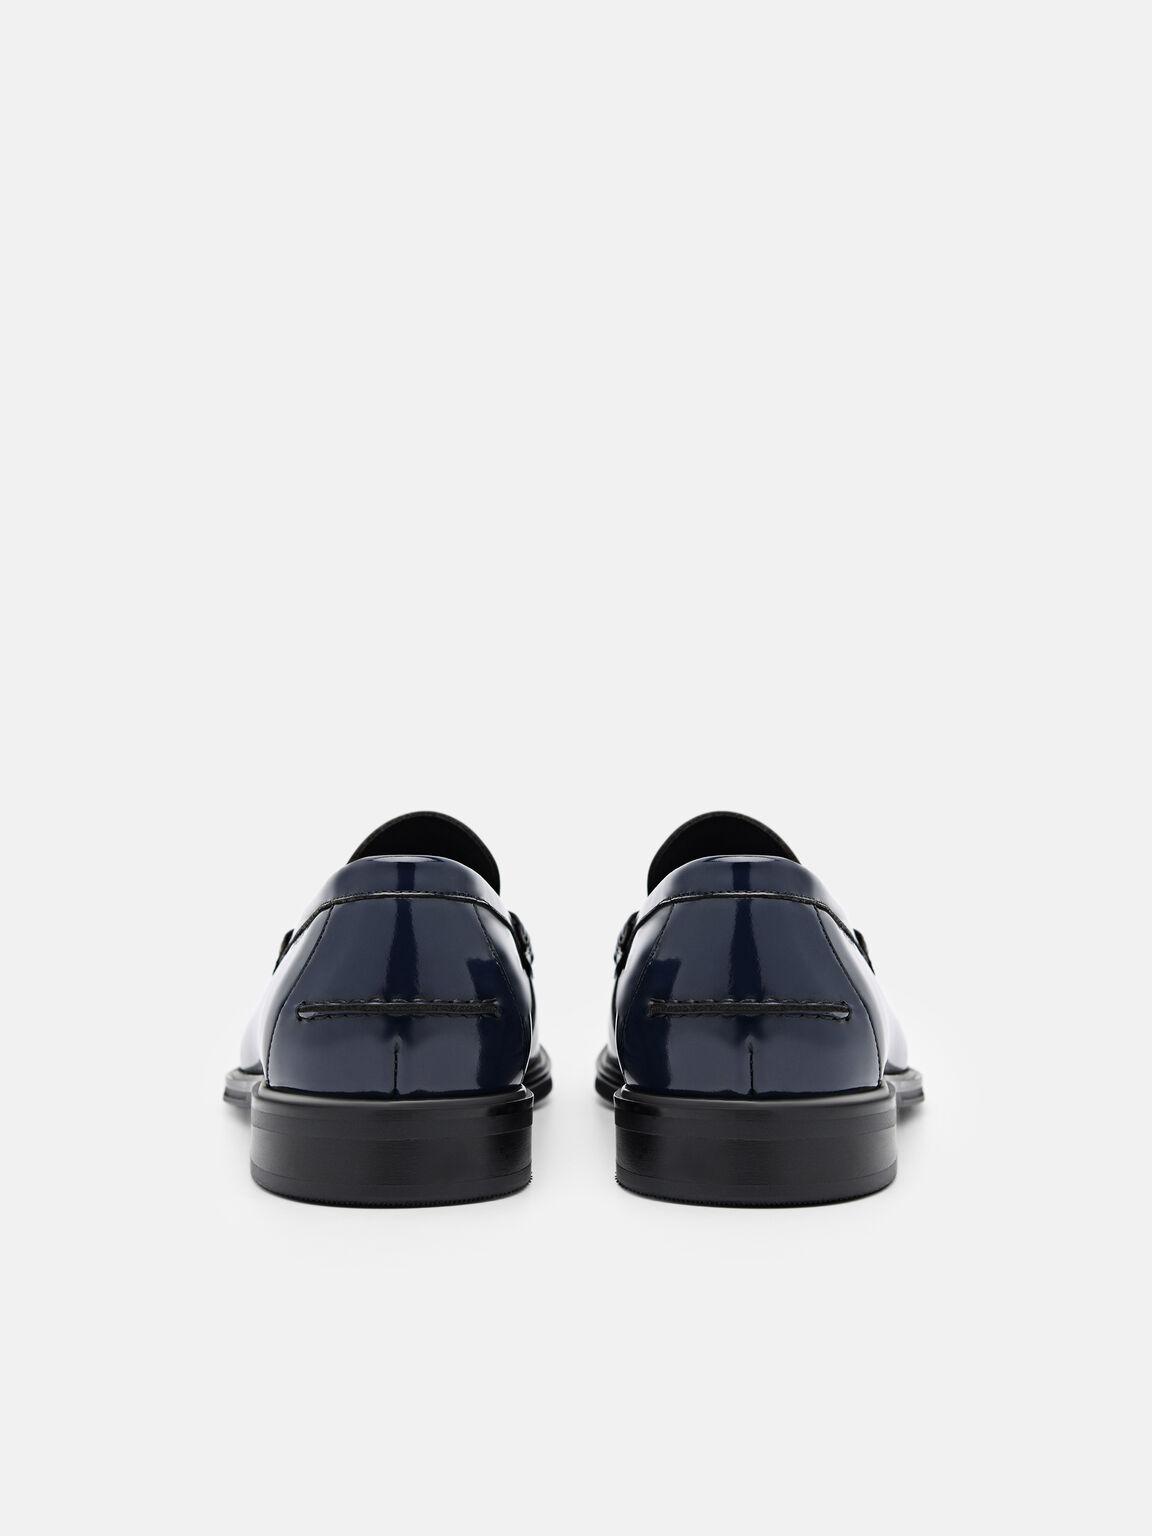 Leather Penny Loafers, Navy, hi-res